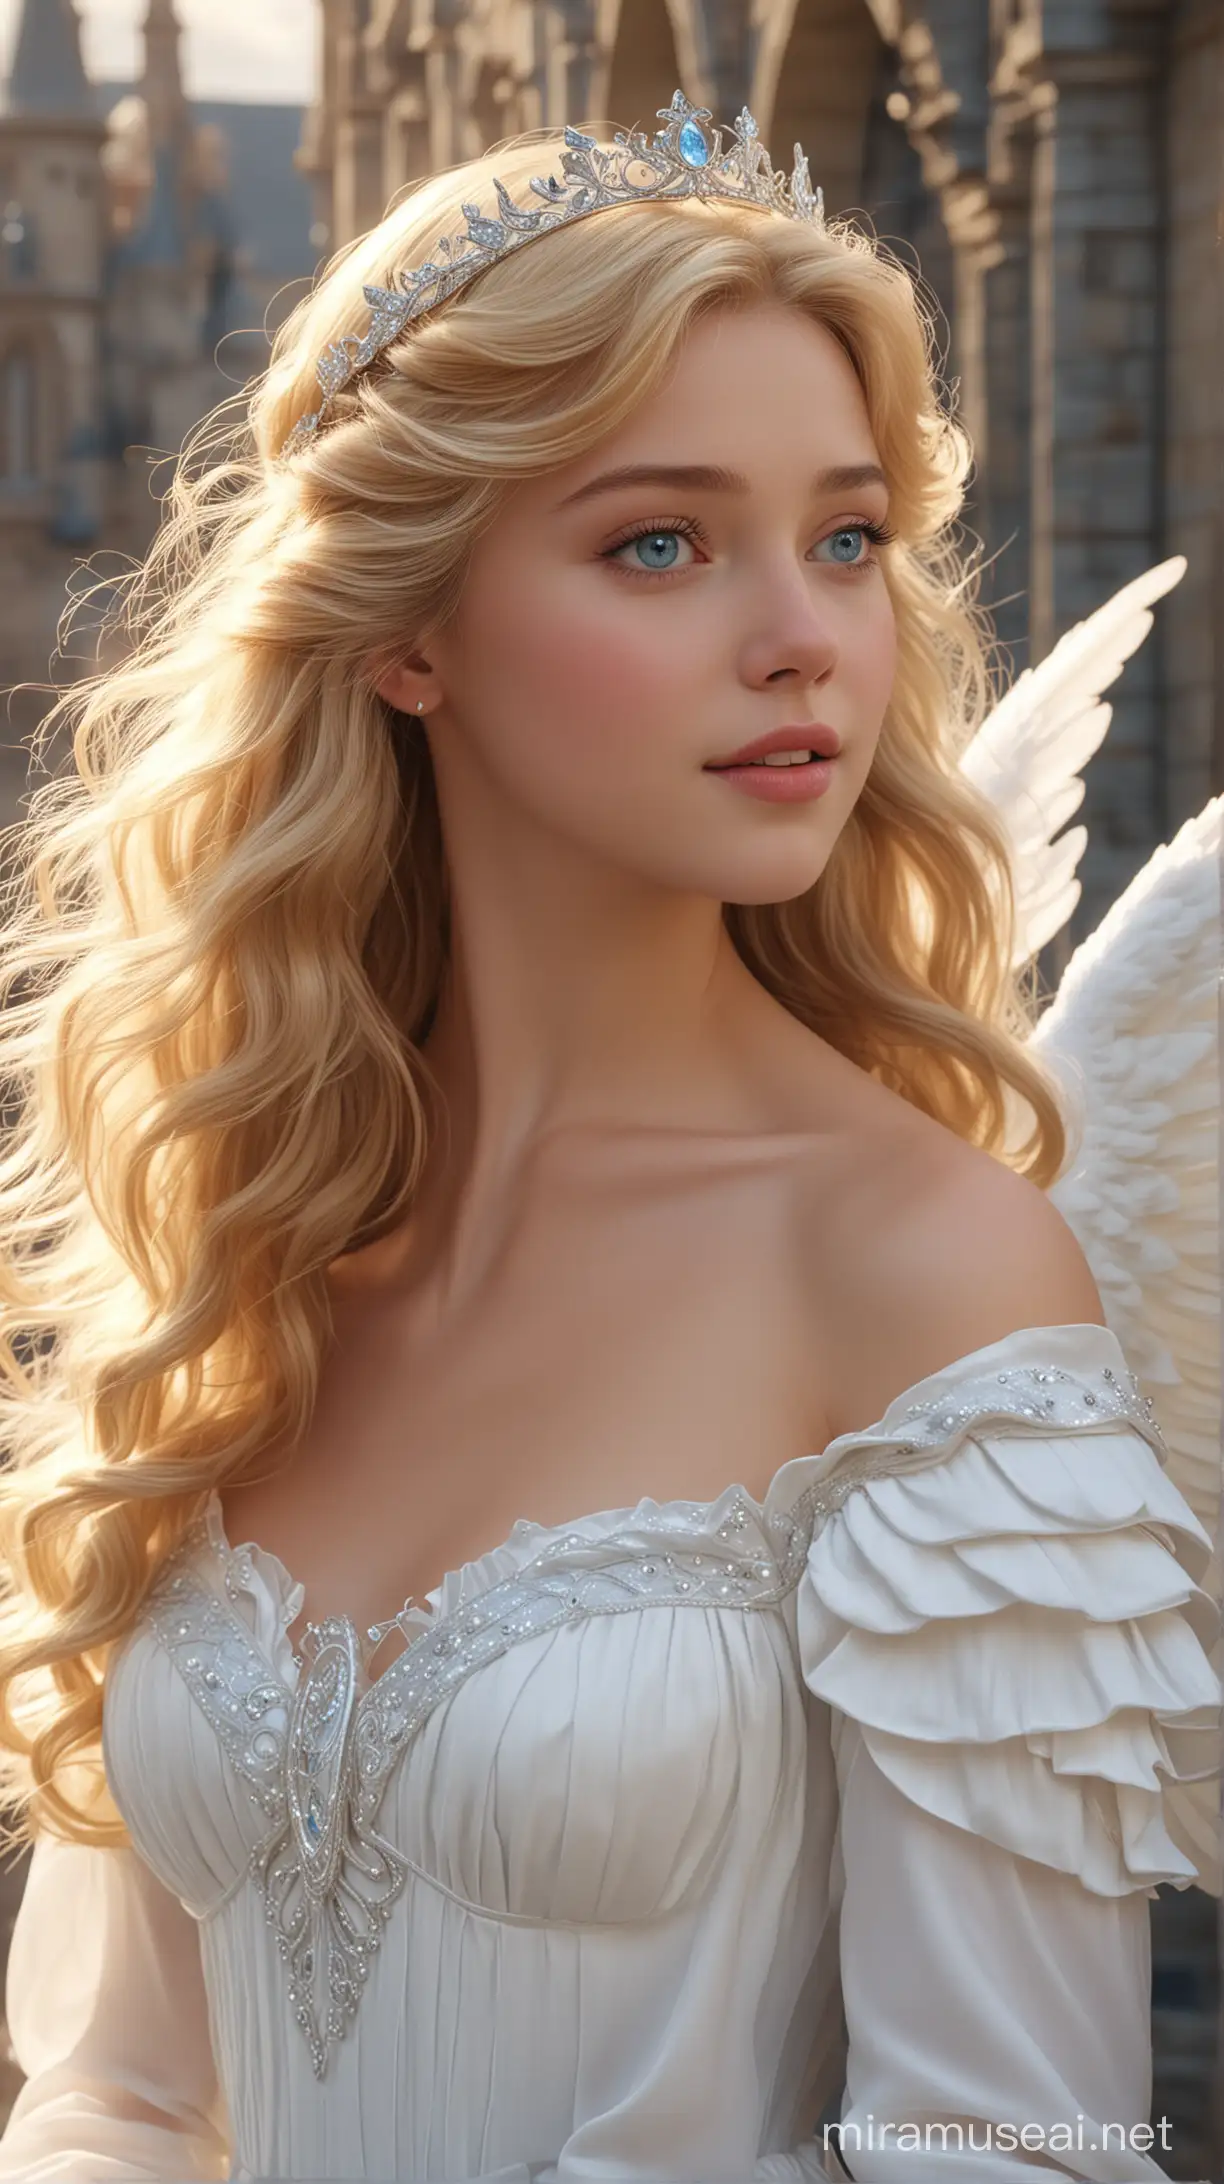 in the sky natural background there are disney princess Aurora France 18-years and 
long wavy blonde hair with bangs and blue eyes and celestial white dress and with large white angel wings face beautiful 8k re solution ultra-realisti